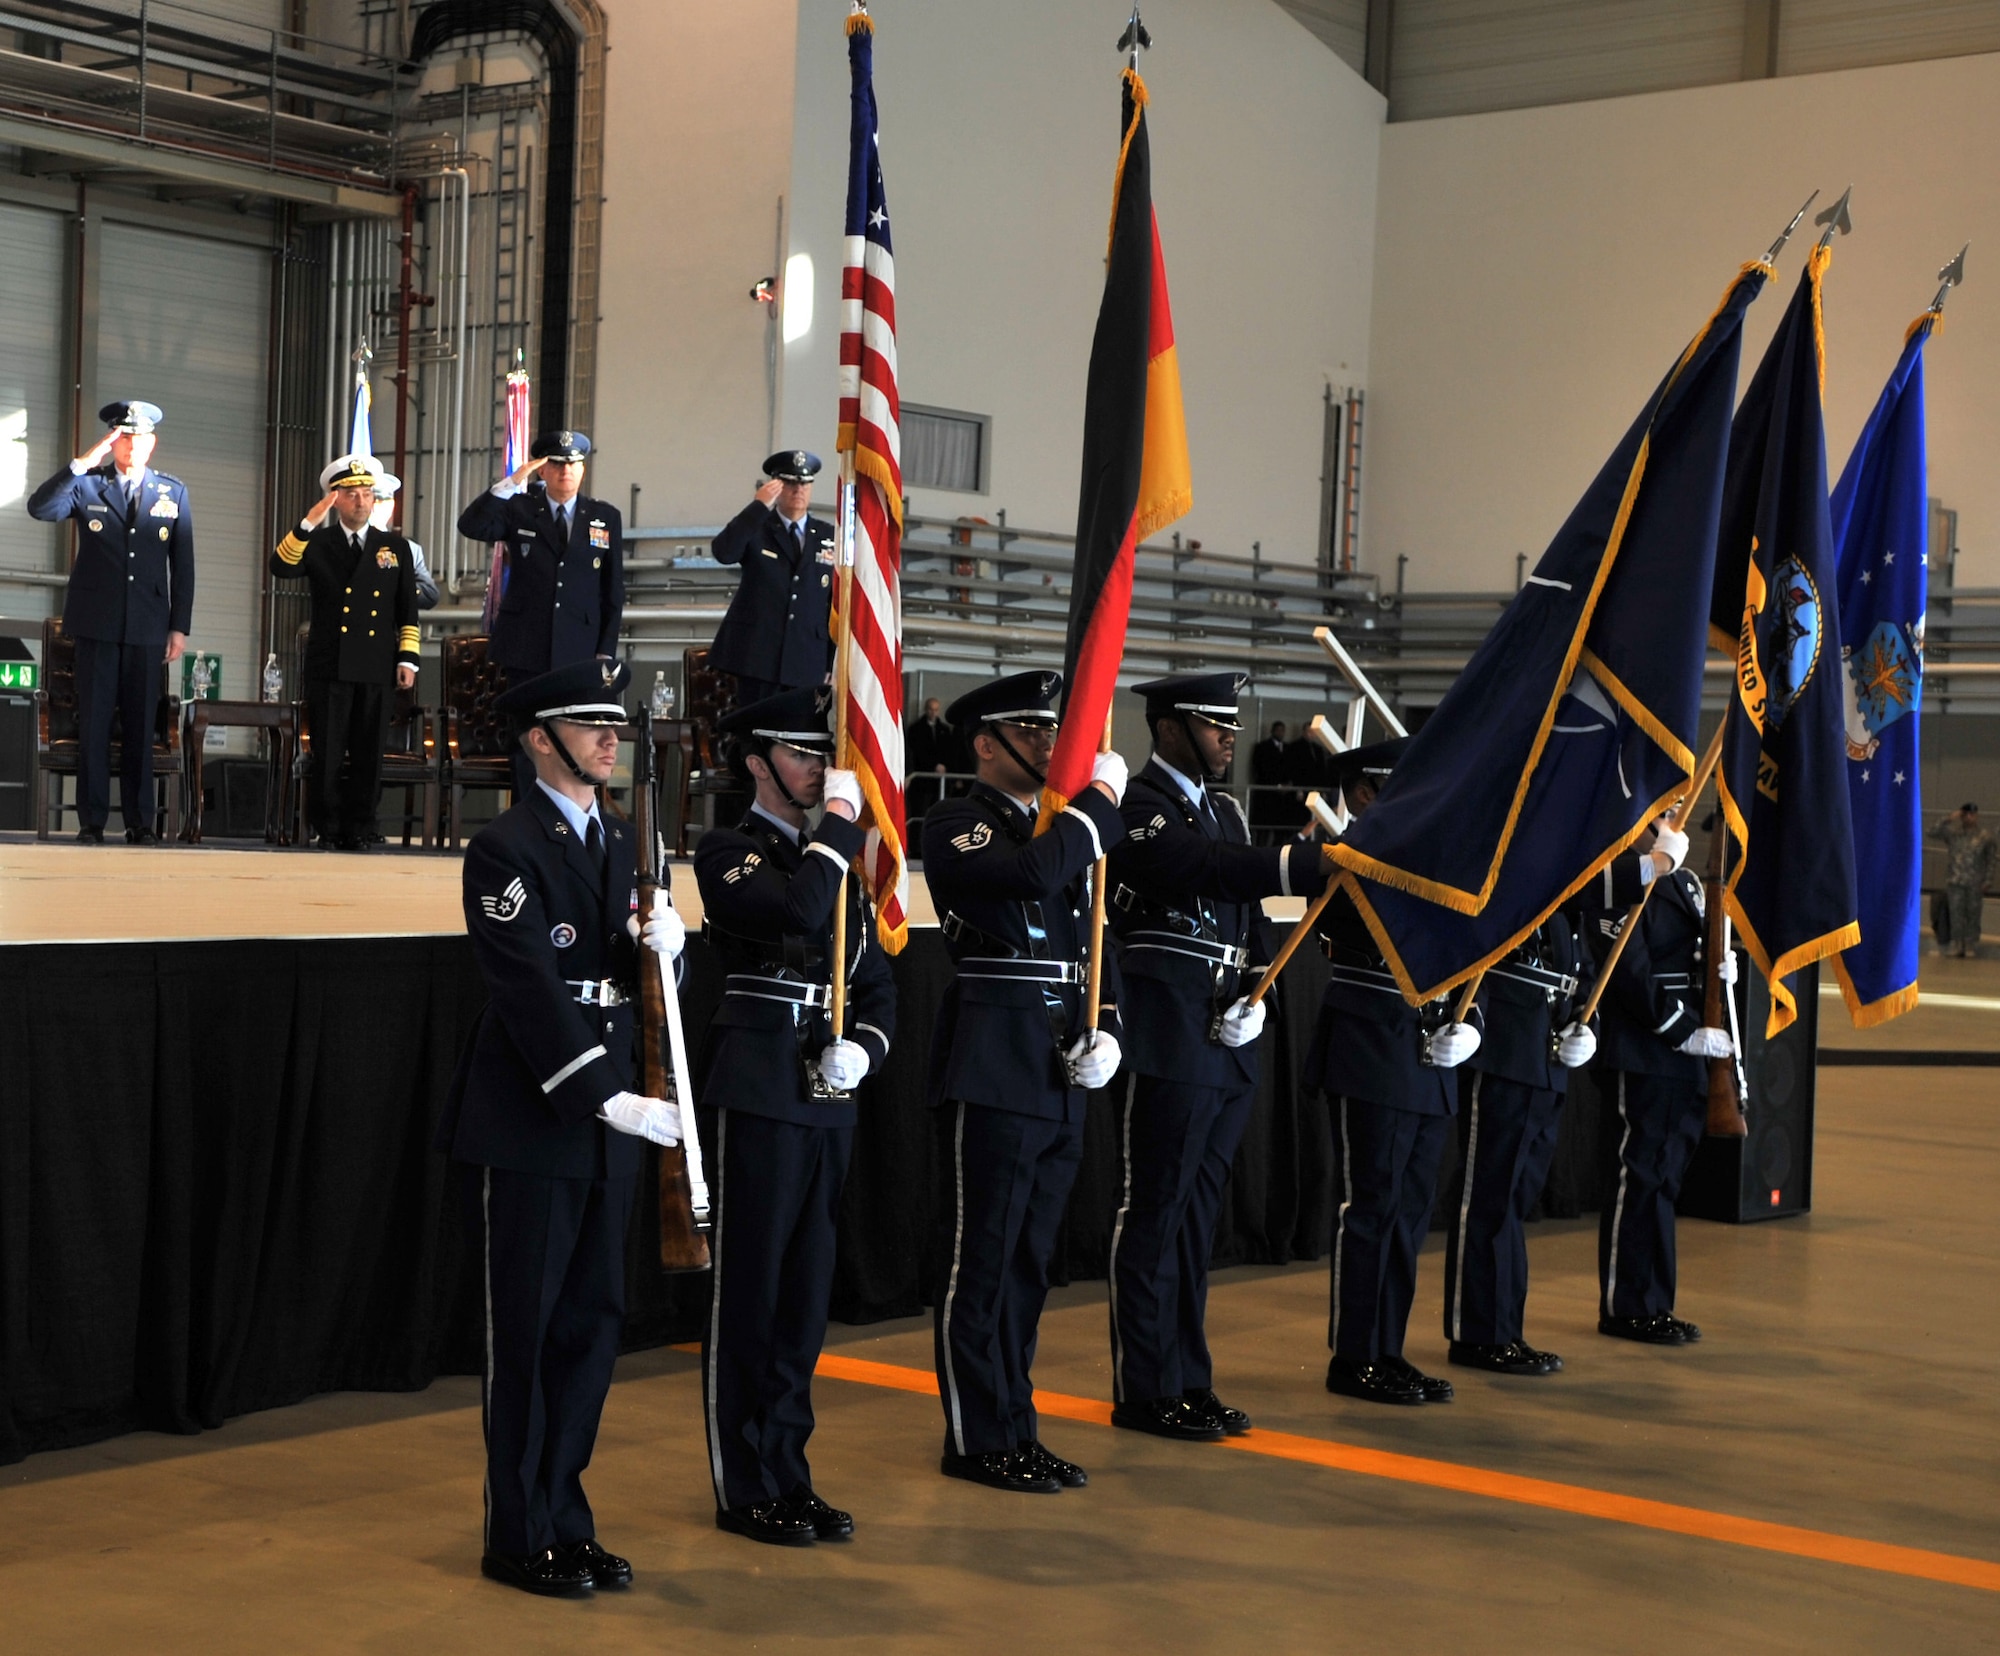 Air Force Chief of Staff Gen. Norton Schwartz, Navy Adm. James G. Stavridis, European Command and Supreme Allied Commander, Europe, Gen. Roger A. Brady, outgoing U.S. Air Forces in Europe commander, and incoming Gen. Mark A. Welsh III, U.S. Air Forces in Europe commander, present arms during the posting of the colors and playing of the National Anthems to begin a change of command ceremony, Ramstein Air Base, Germany, Dec. 13, 2010. Gen. Brady, outgoing USAFE commander, relinquished command during the change of command ceremony after providing command and control for air, space and missile defense for activities in an area of operations covering almost one-fifth of the globe which included 51 countries in Europe, Asia, the Middle East, and the Arctic and Atlantic oceans. (U.S. Air Force photo by Senior Airman Caleb Pierce)